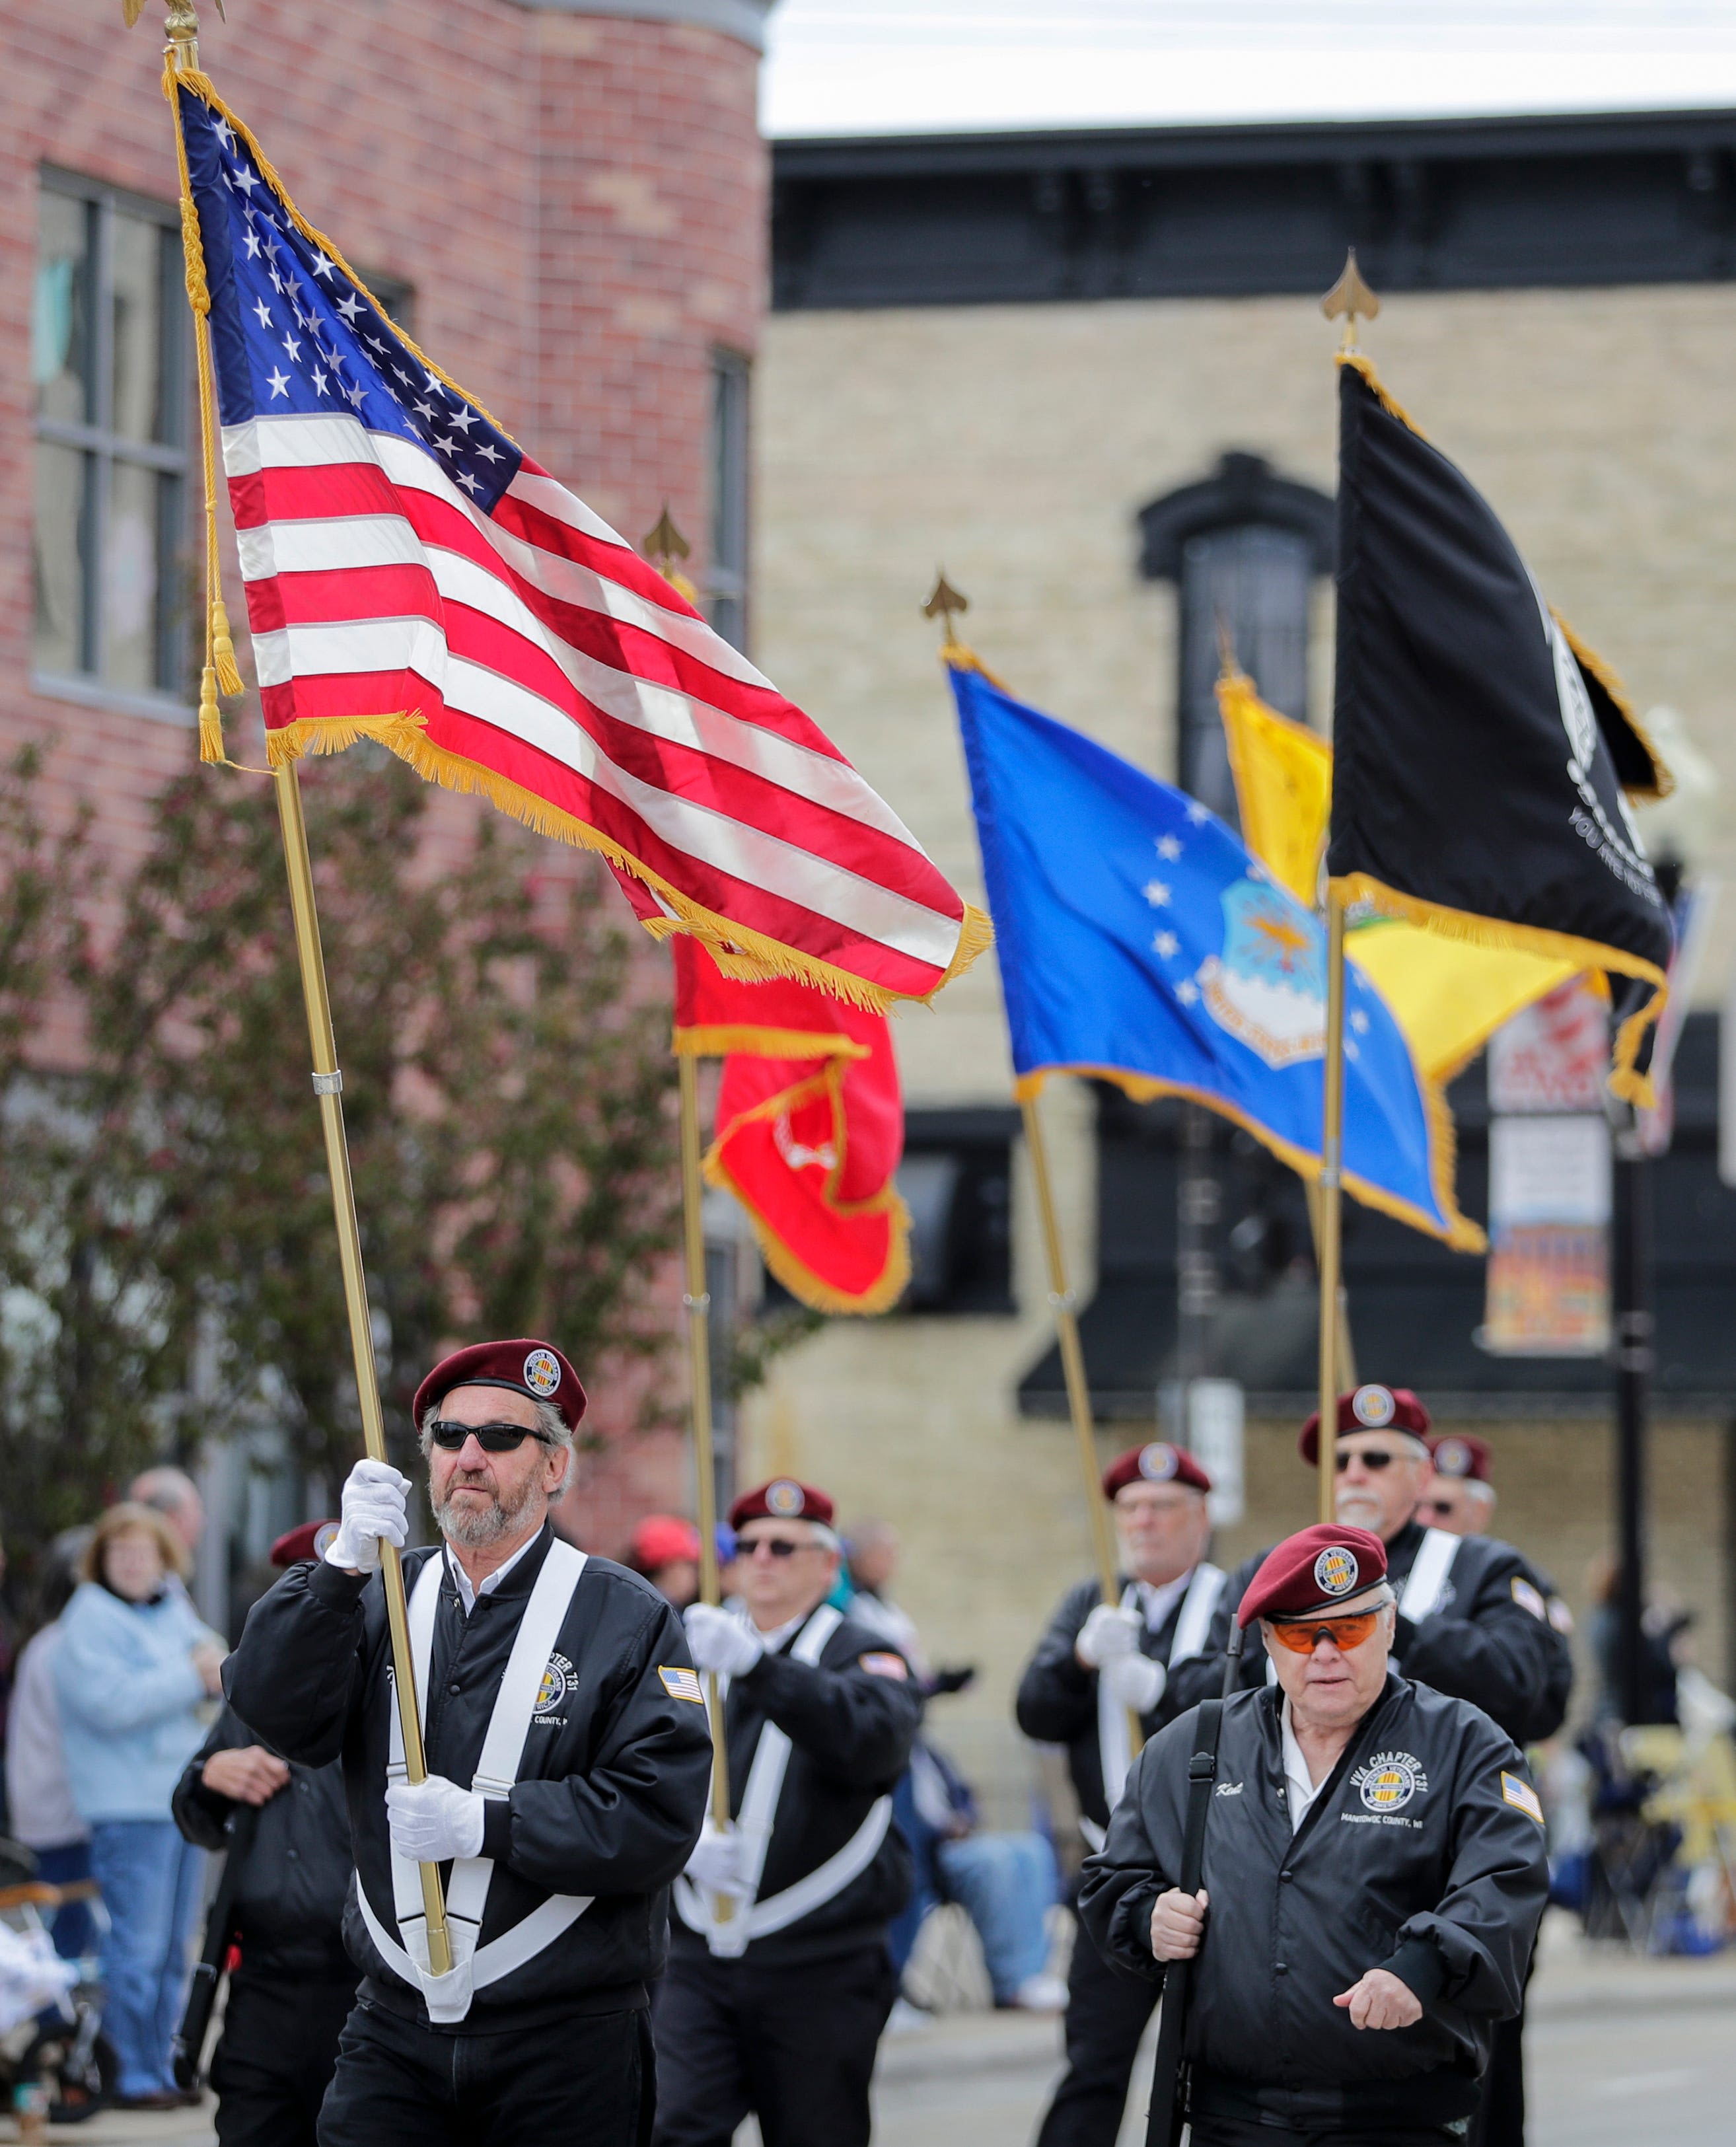 It's Memorial Day weekend. Here are the top things to do in Manitowoc, from the parade and ceremony to live music.